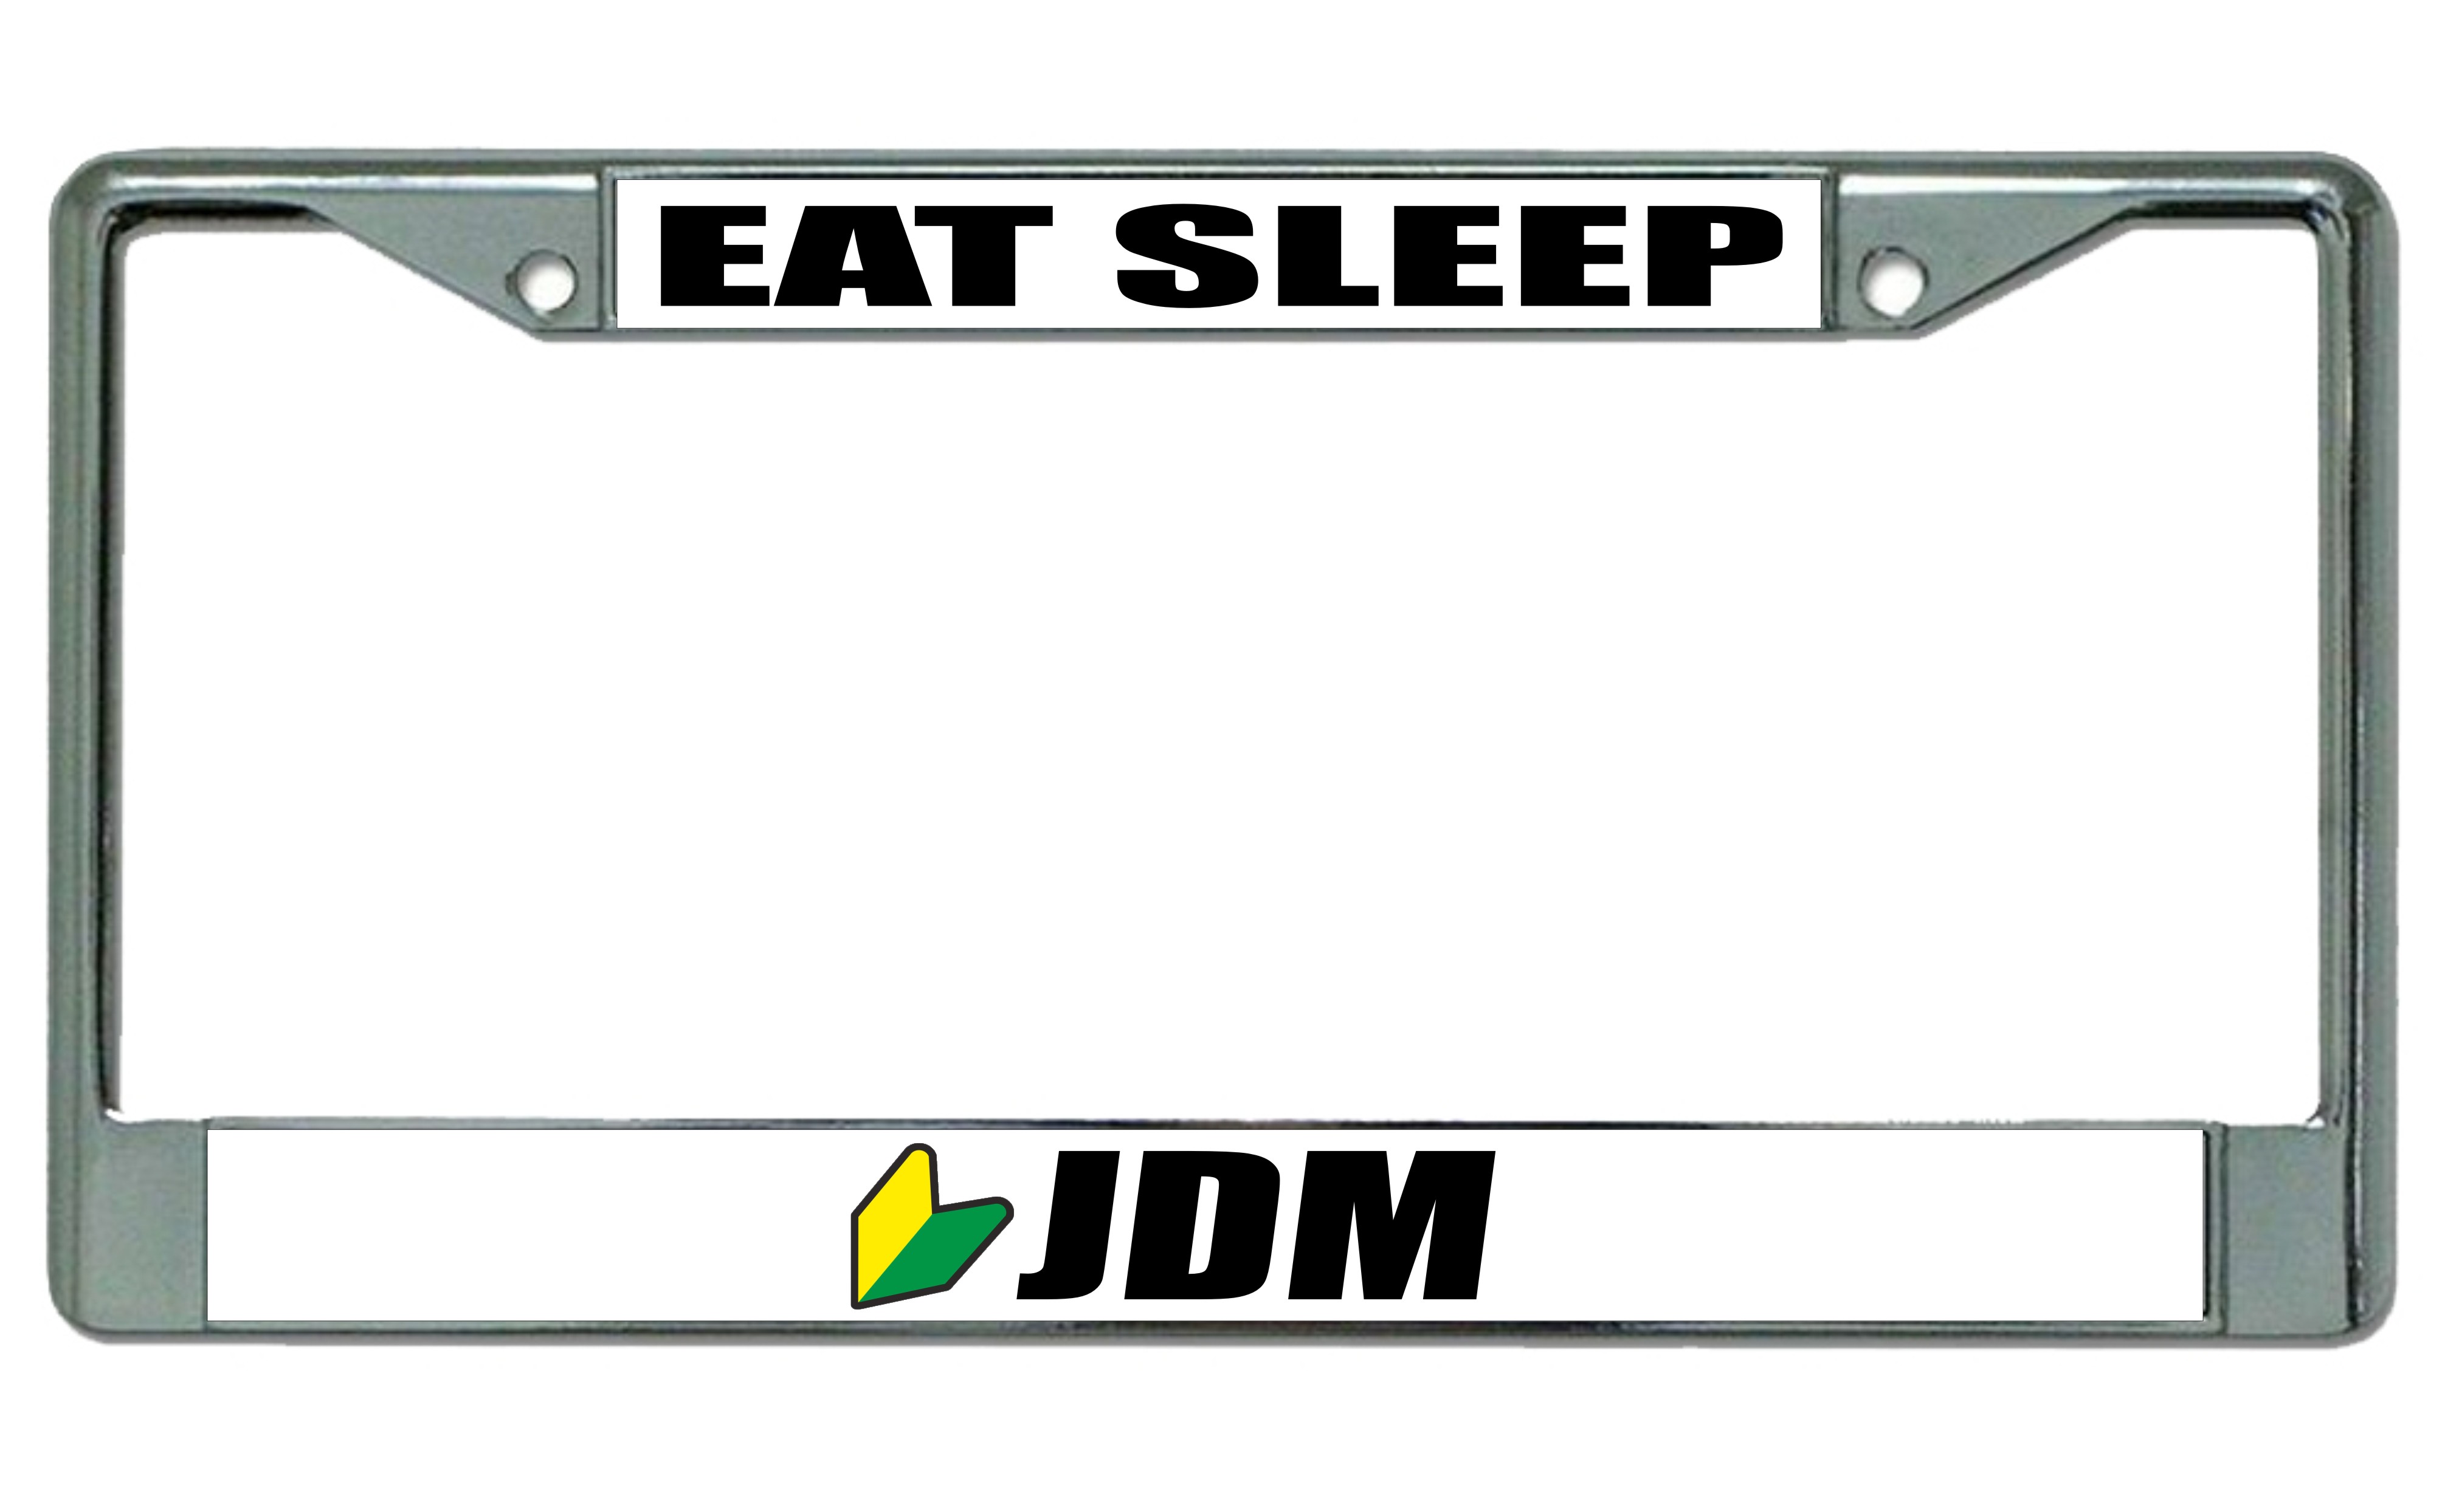 Eat Sleep JDM With Logo Photo License Plate Frame  Free SCREW Caps with this Frame